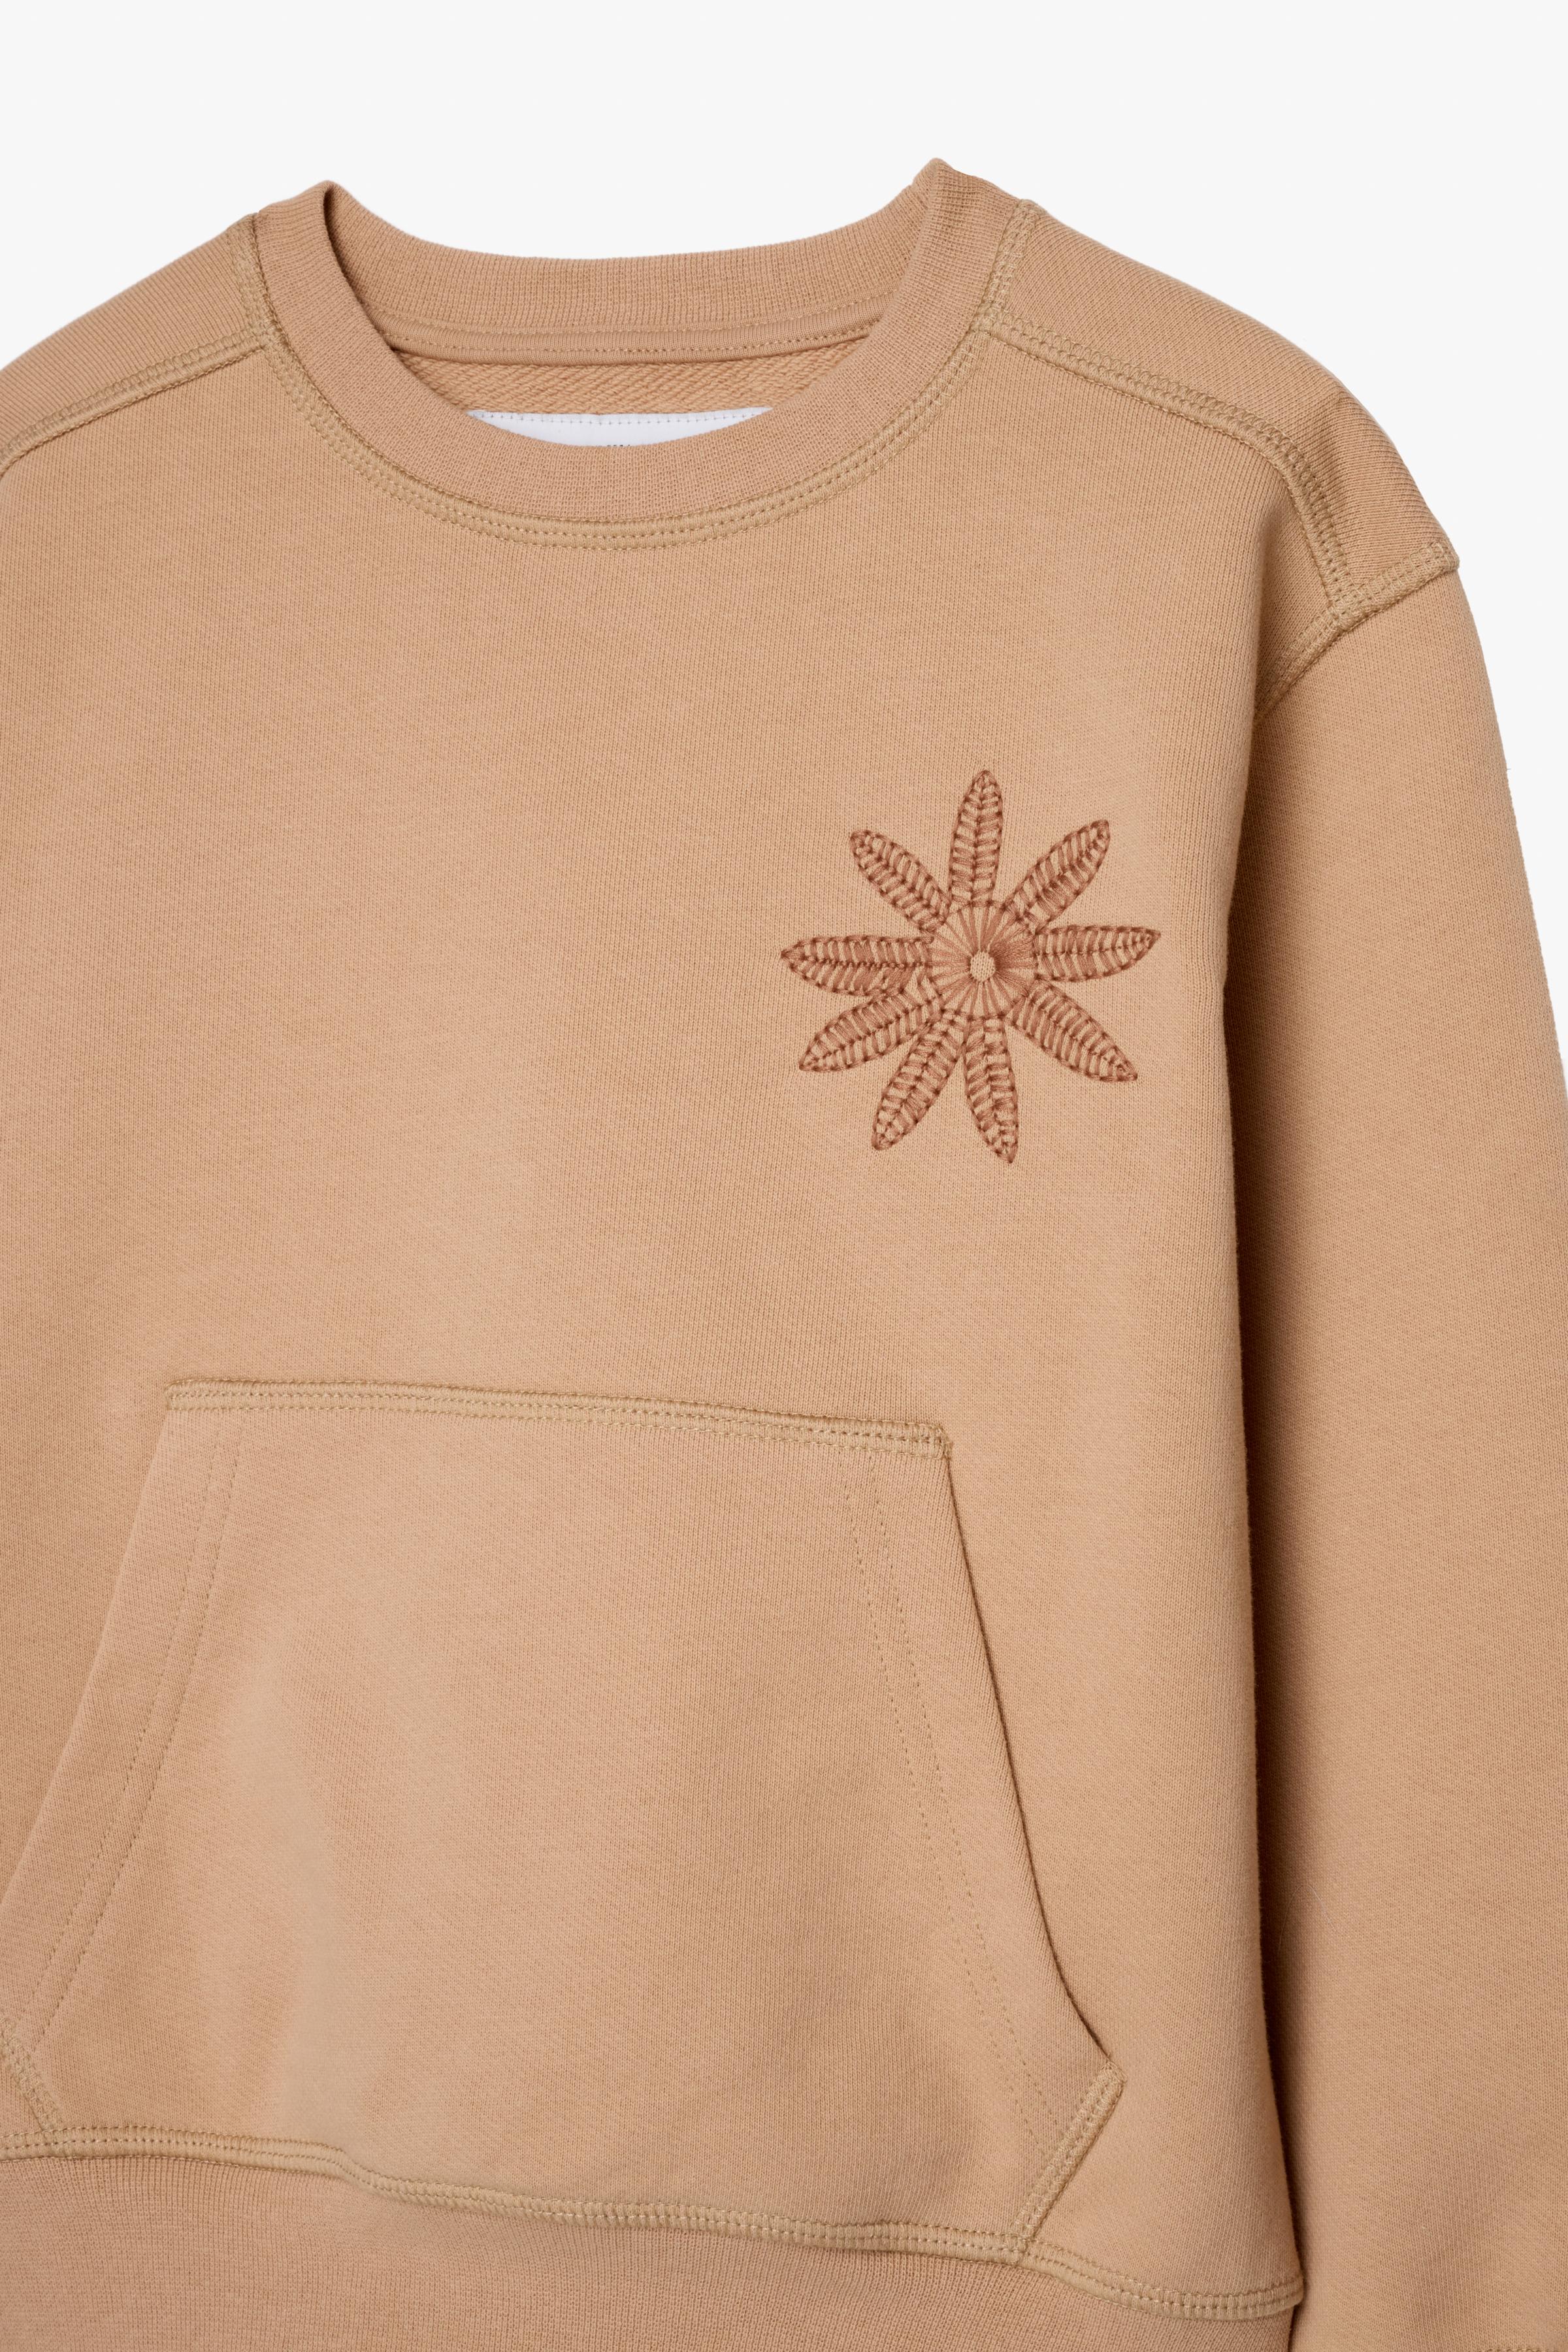 SWEATSHIRT WITH EMBROIDERED FLOWERS - LIMITED EDITION